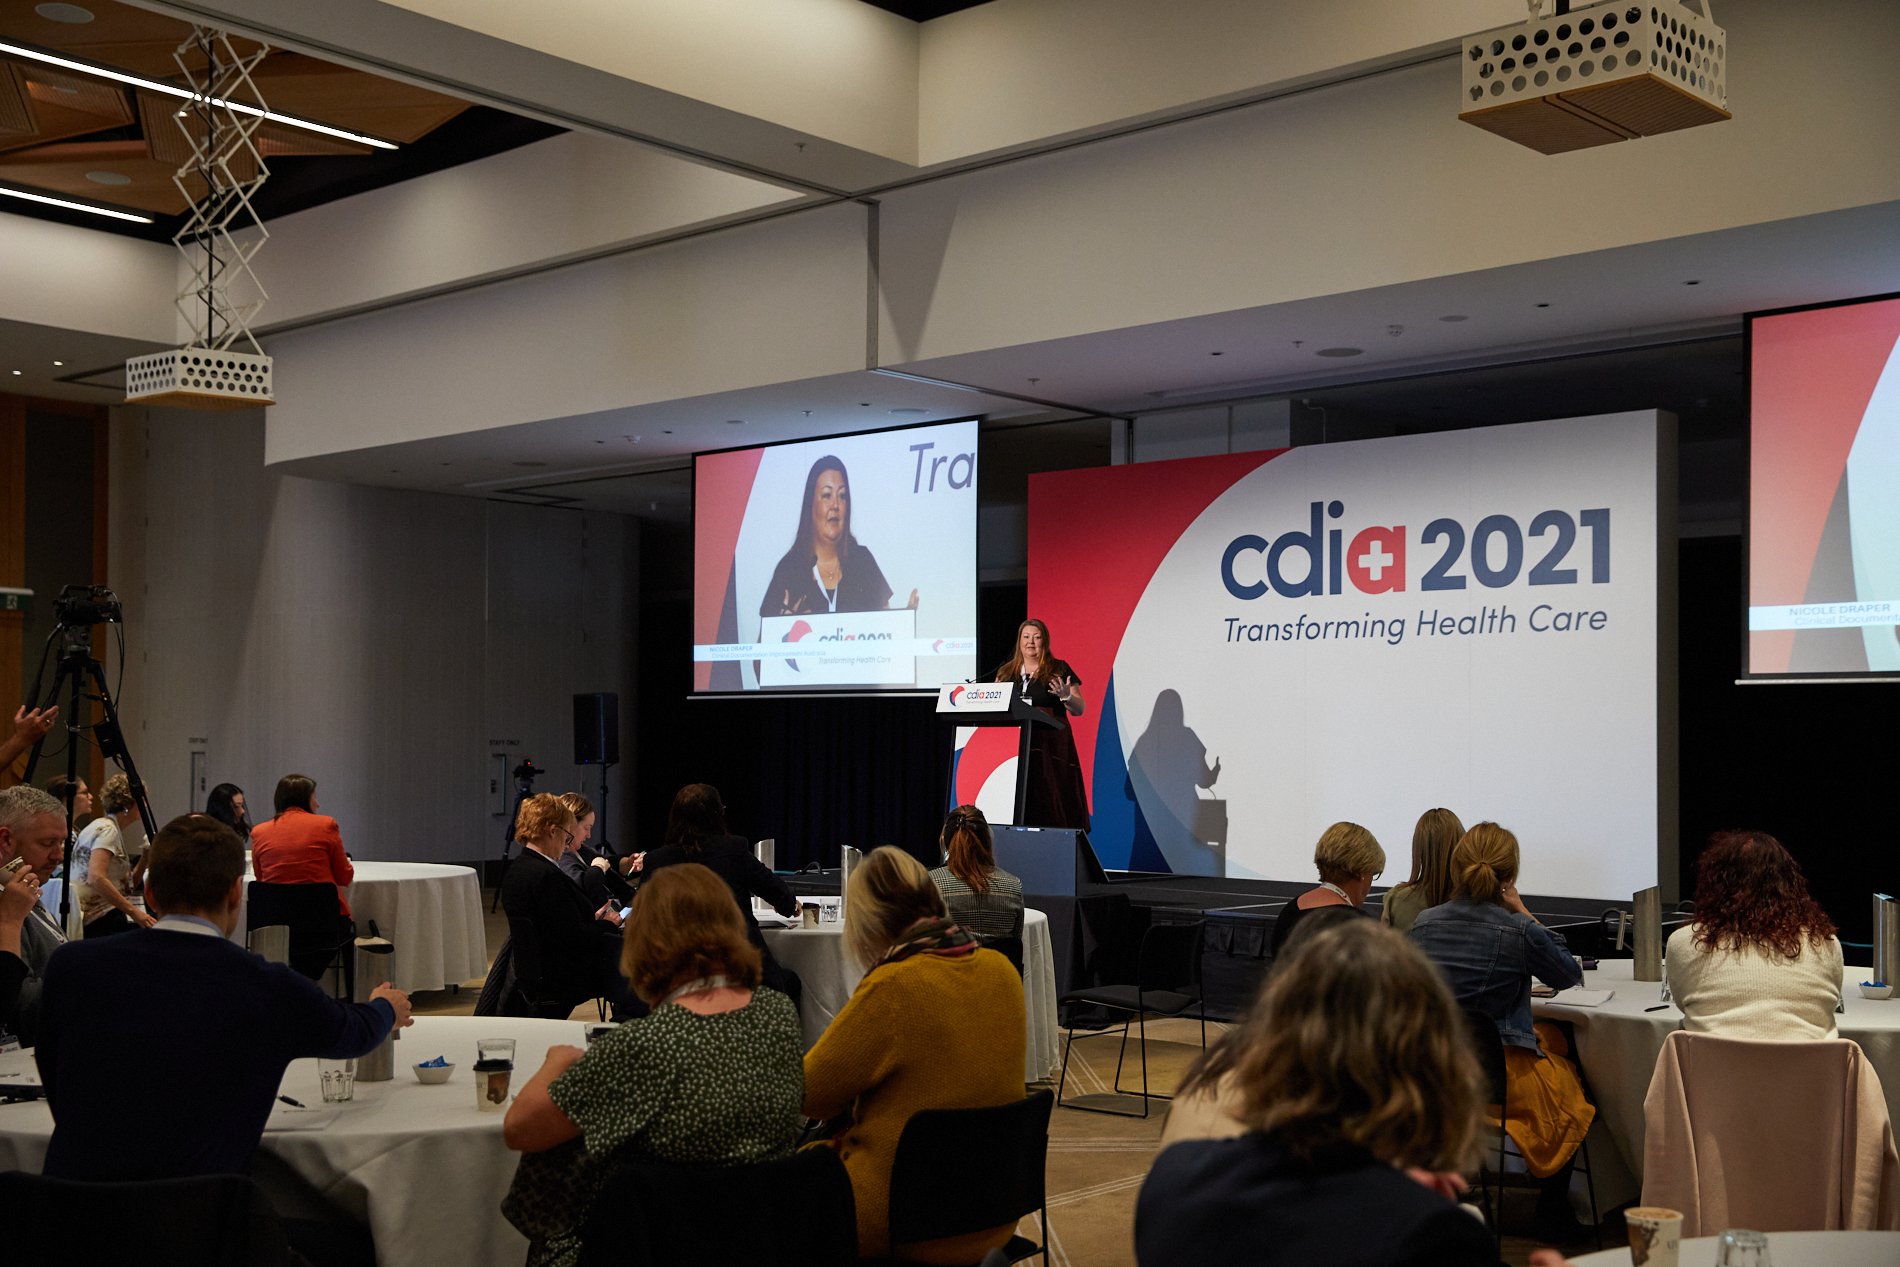 CDI Conference 2021: Transforming Health Care - Questions & Answers